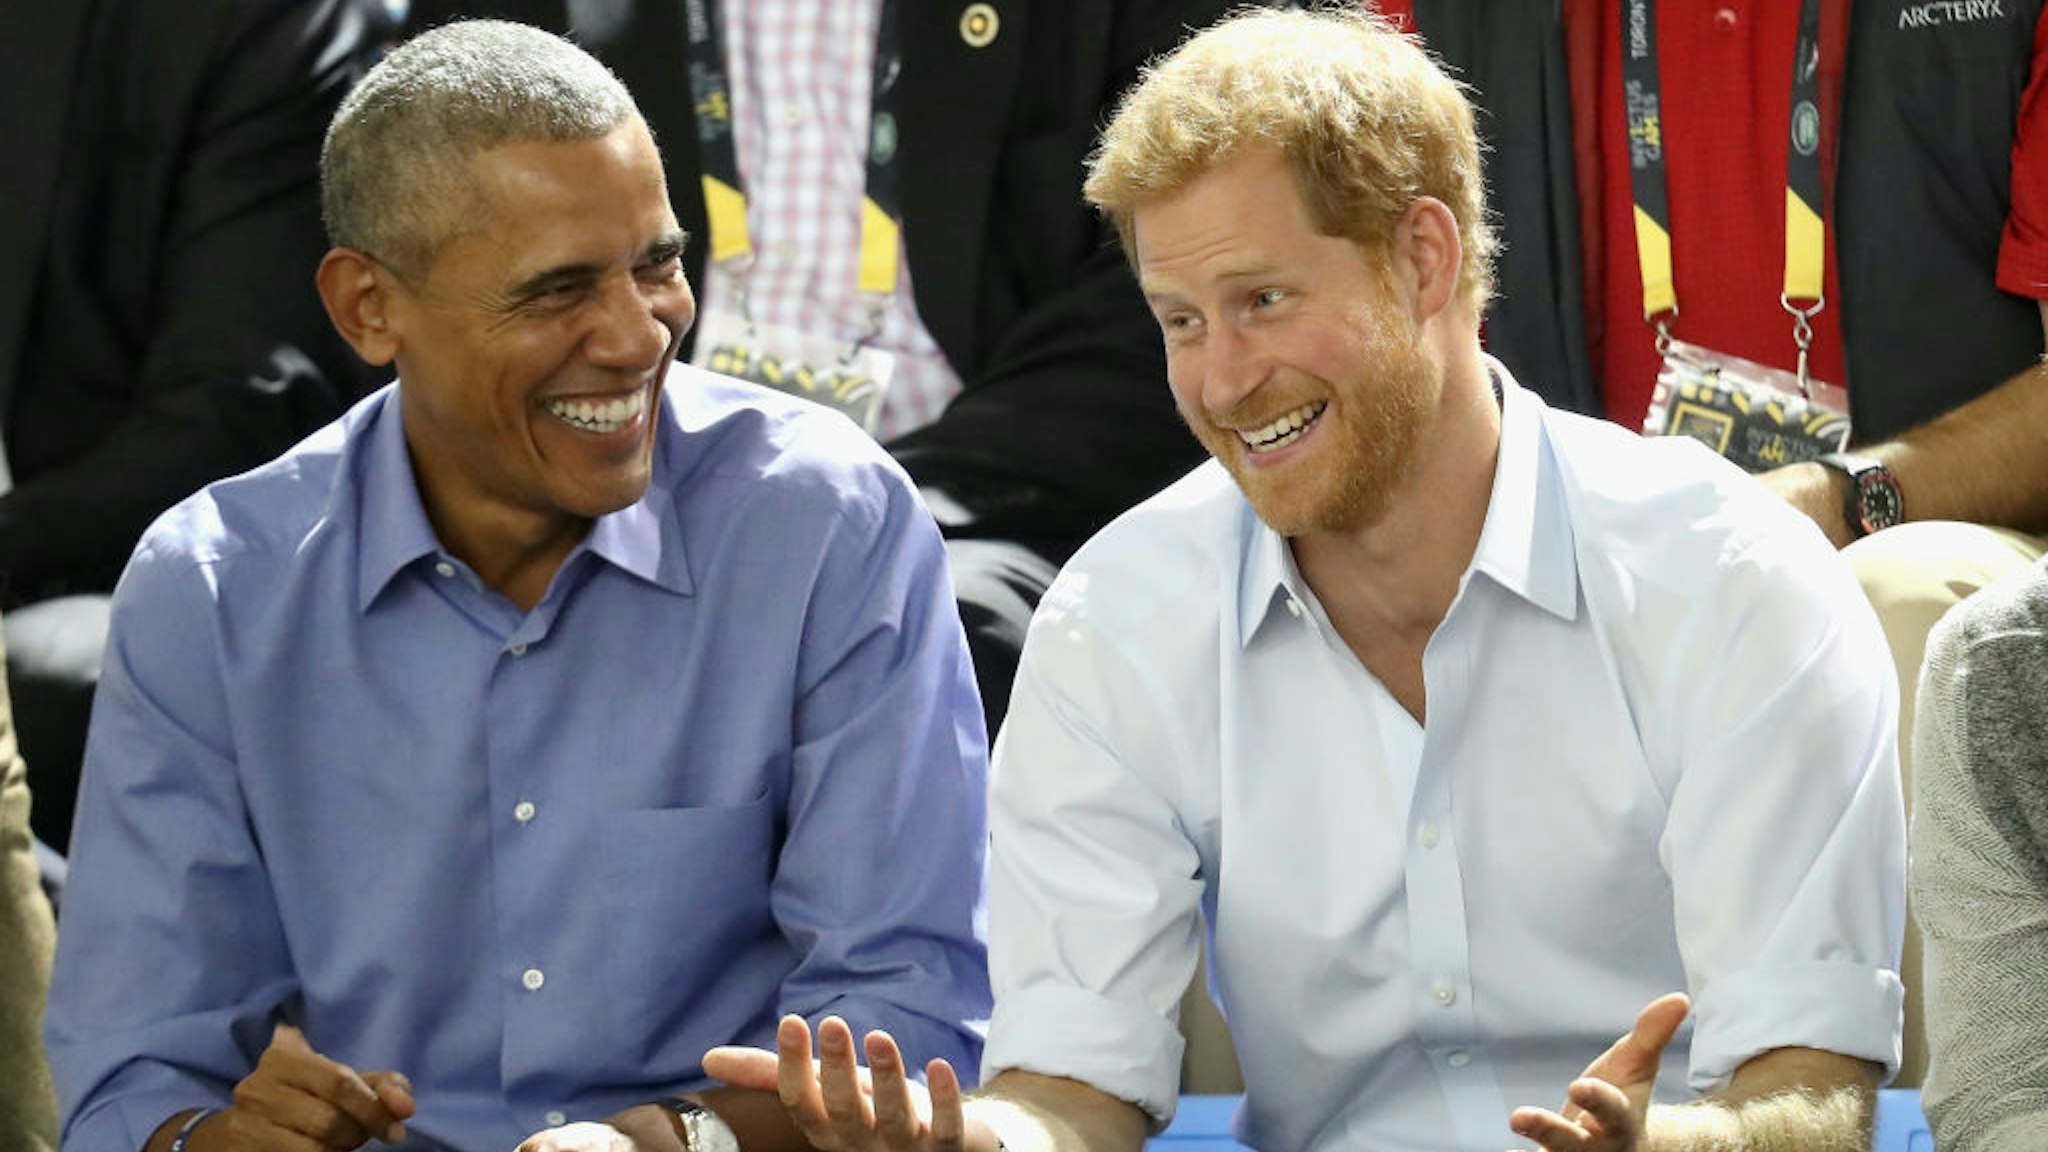 Former U.S. President Barack Obama and Prince Harry share a joke as they watch wheelchair baskeball on day 7 of the Invictus Games 2017 on September 29, 2017 in Toronto, Canada. (Chris Jackson/Getty Images for the Invictus Games Foundation)